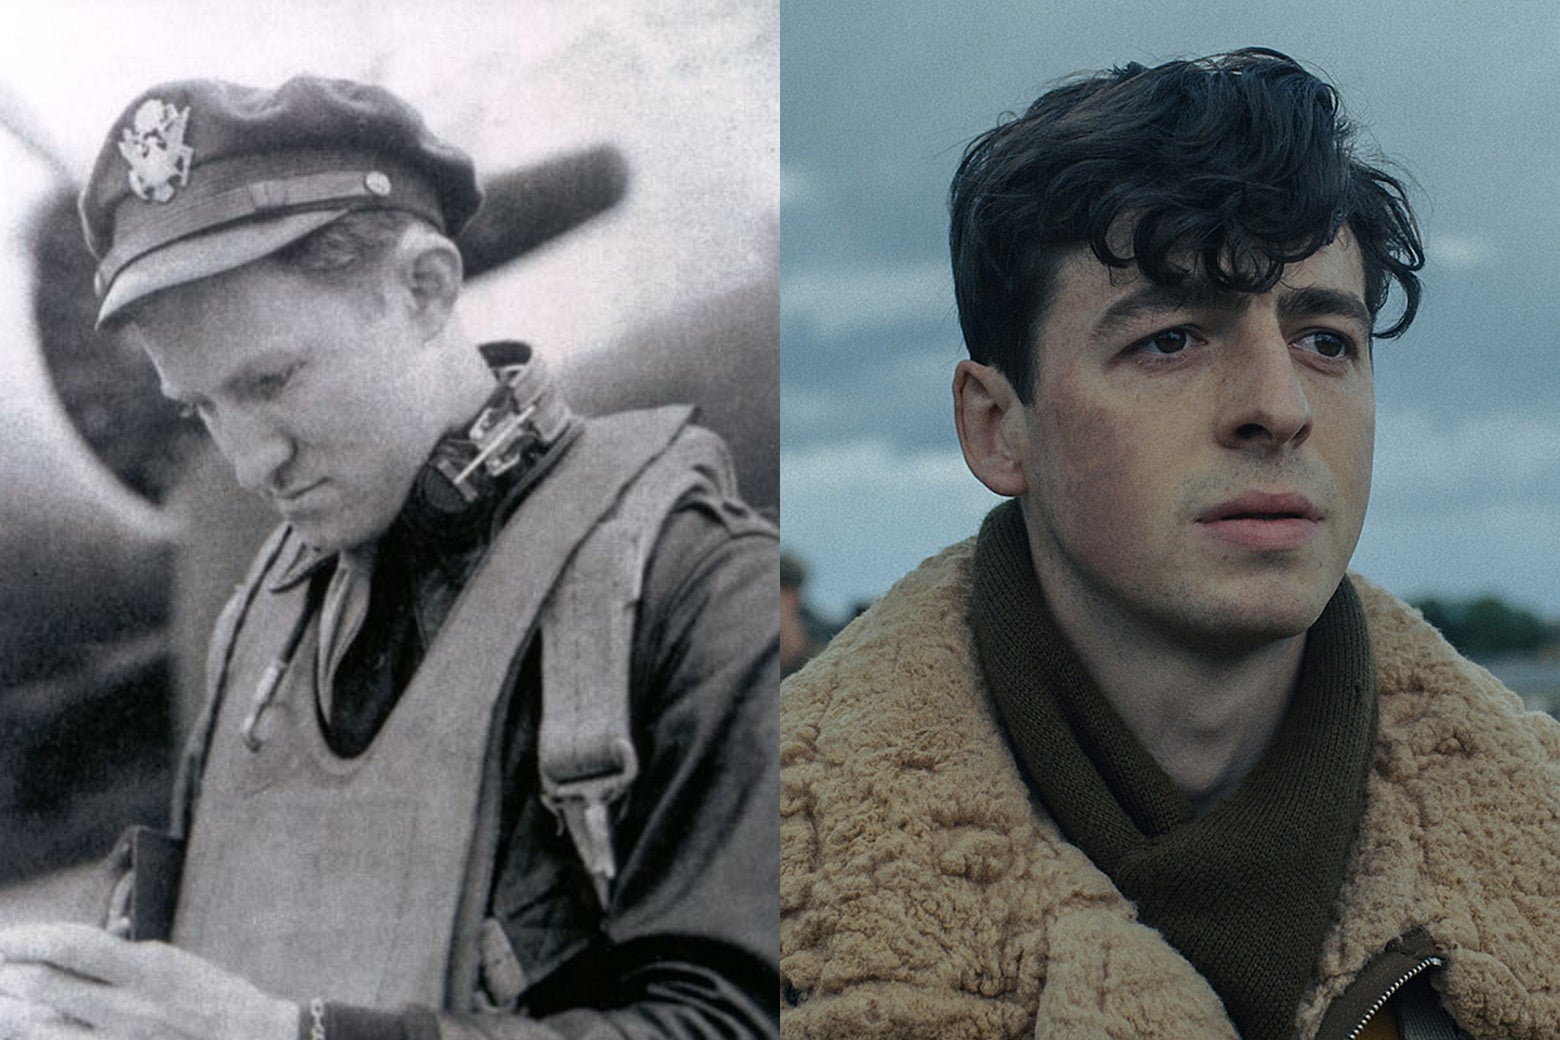 Harry Crosby and Anthony Boyle.